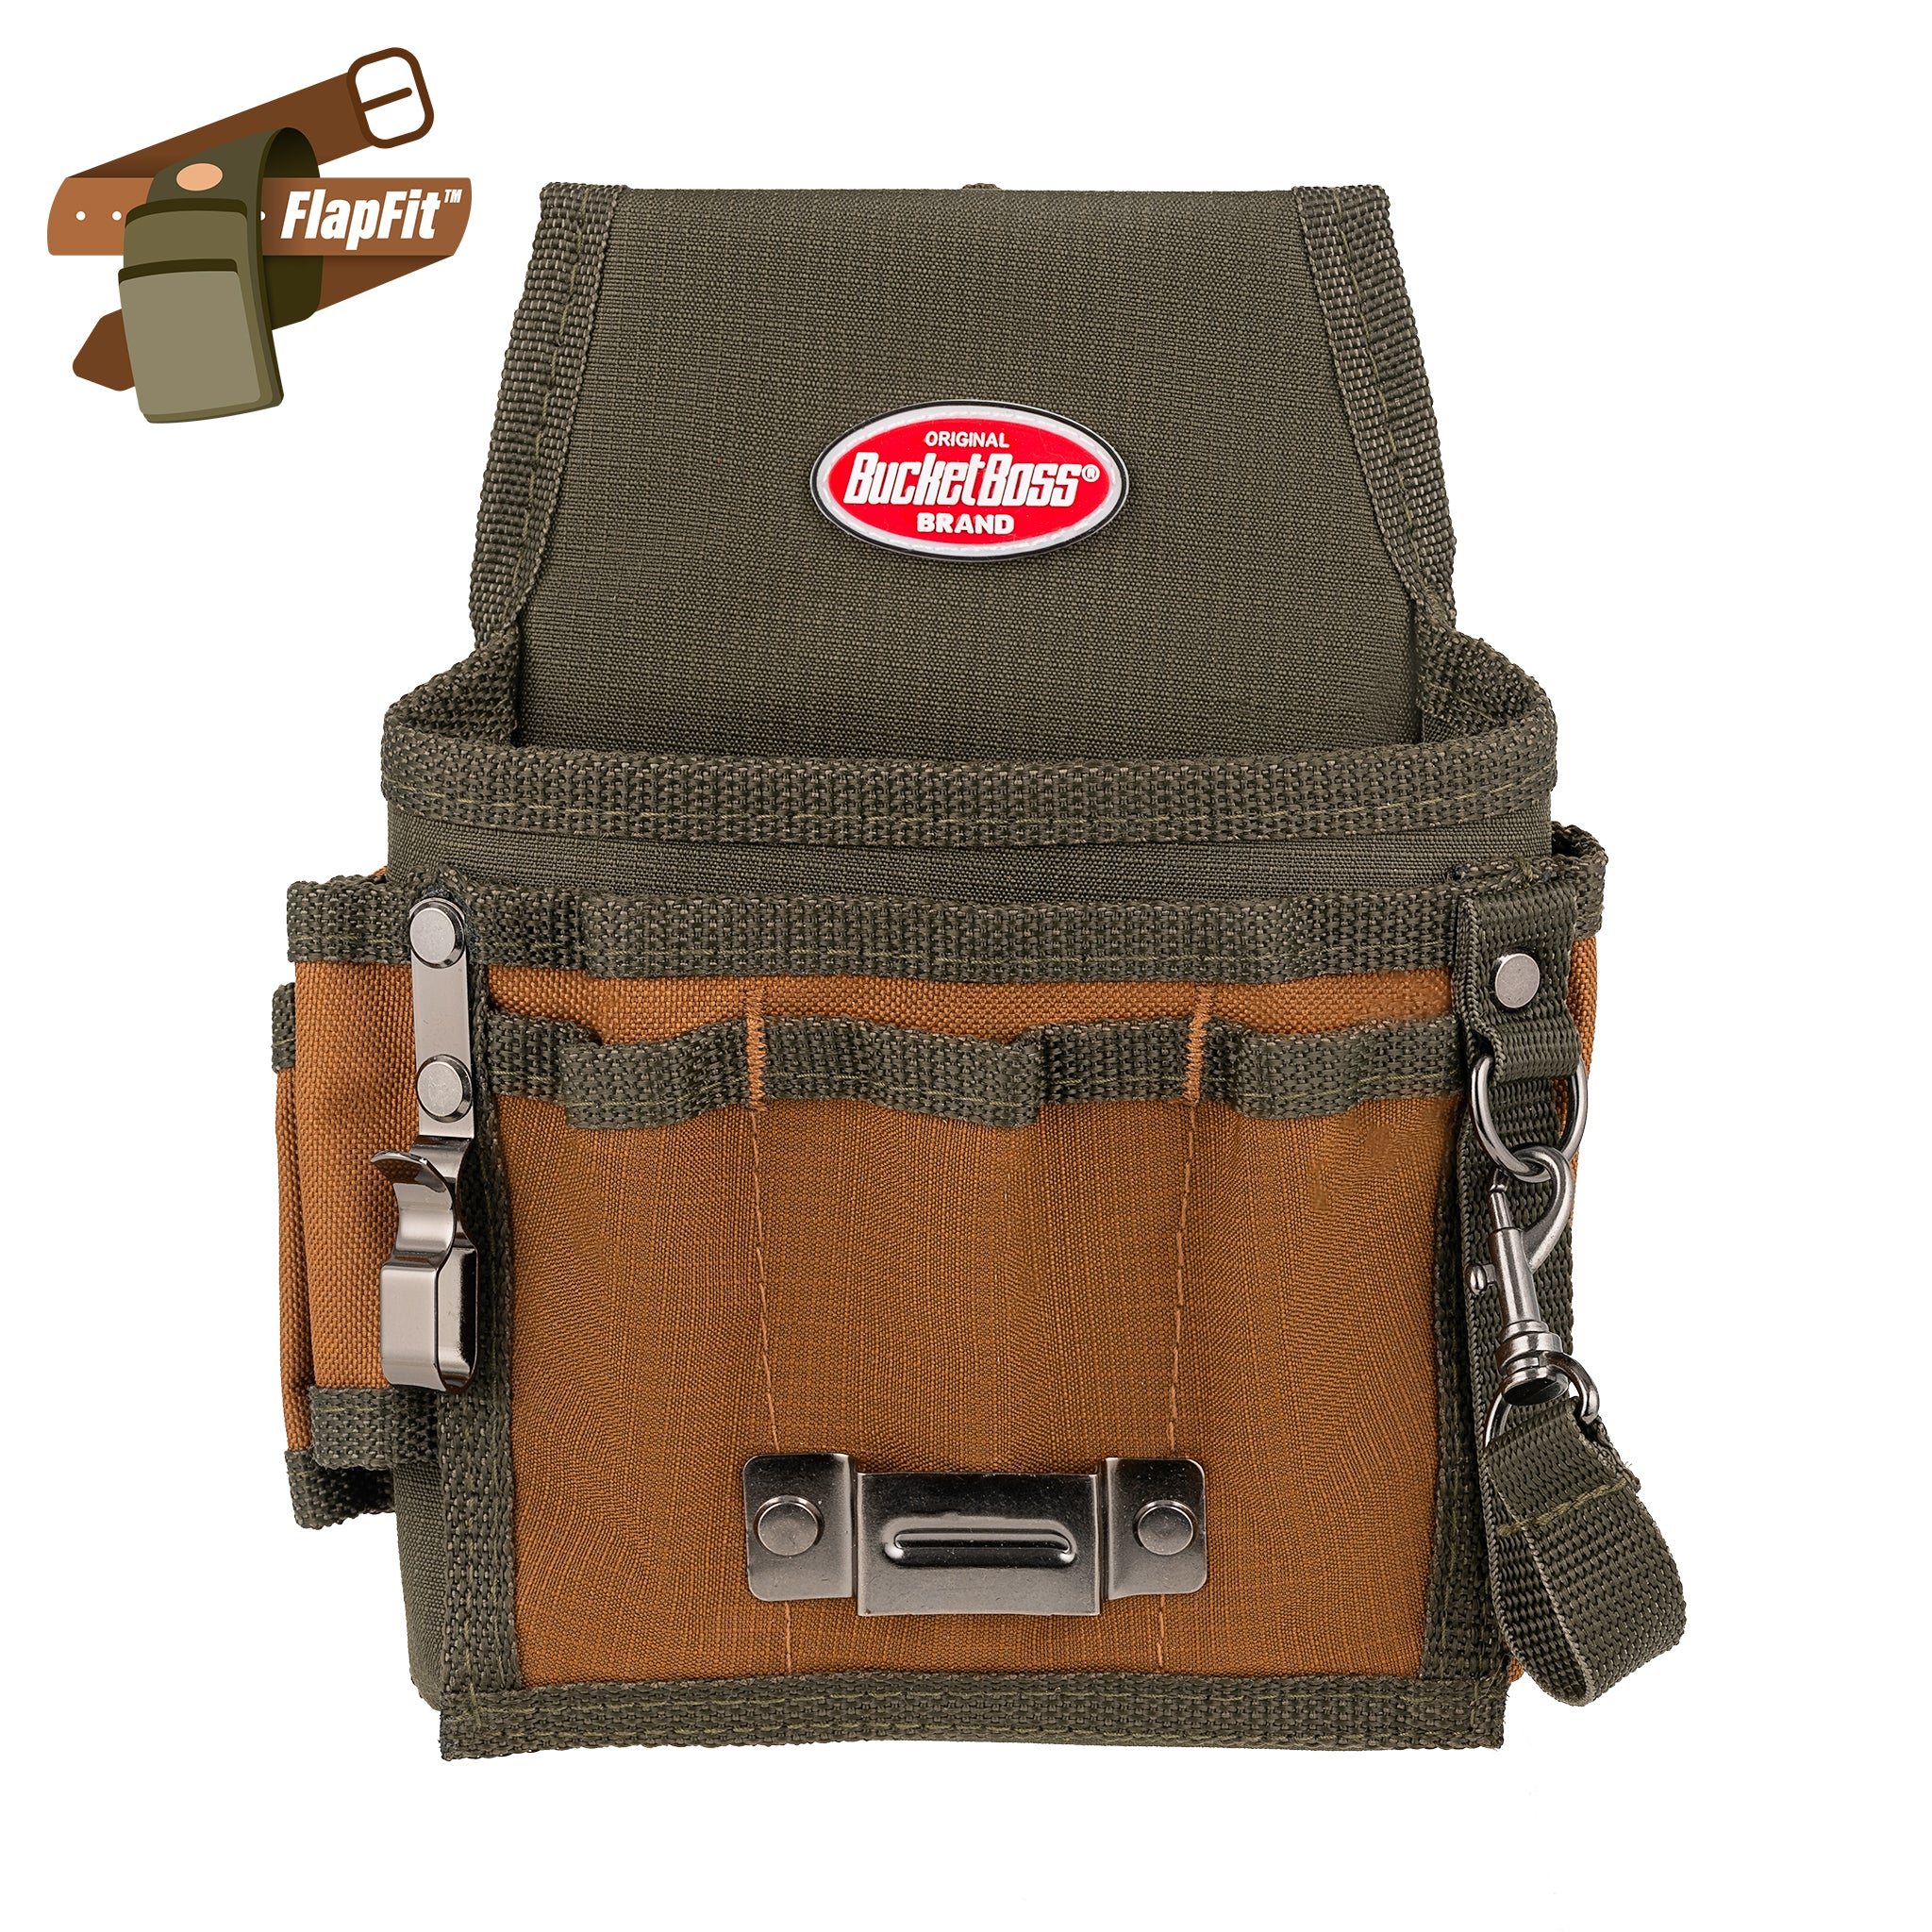 Tool Pouch with FlapFit - Bucket Boss